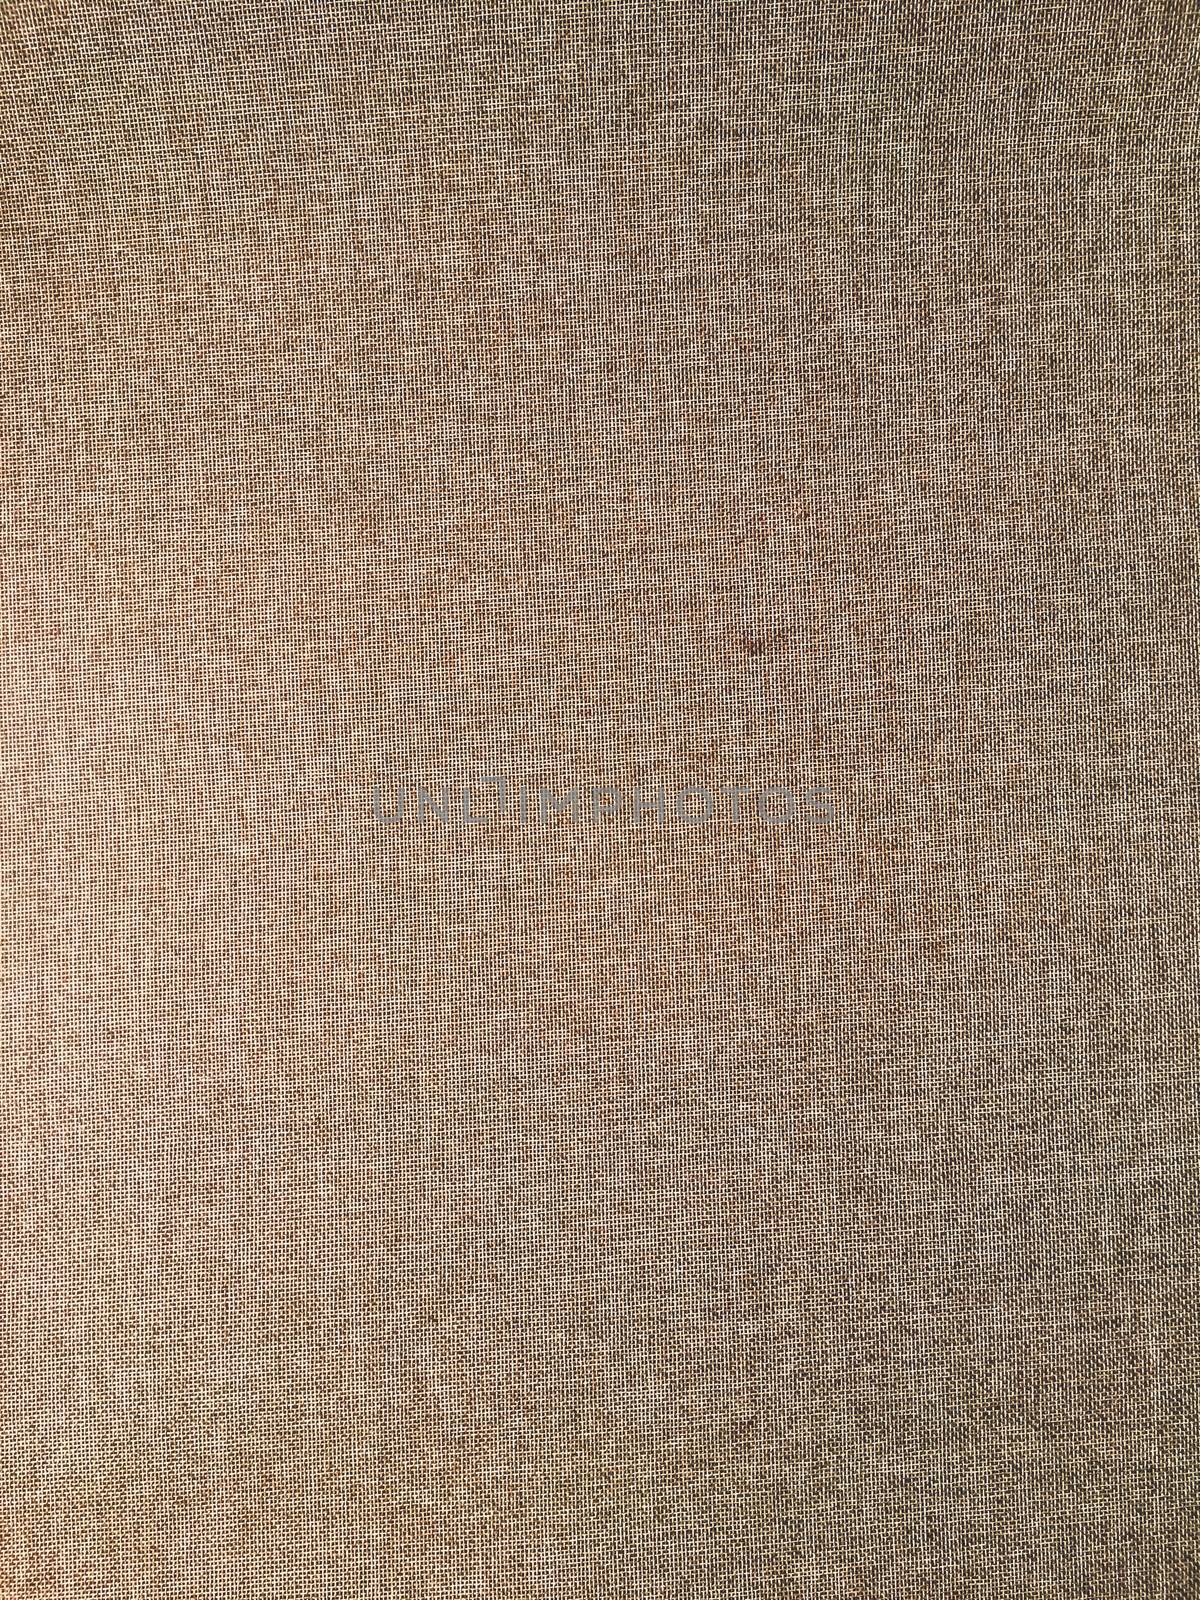 Linen texture as rustic background, fabric and material